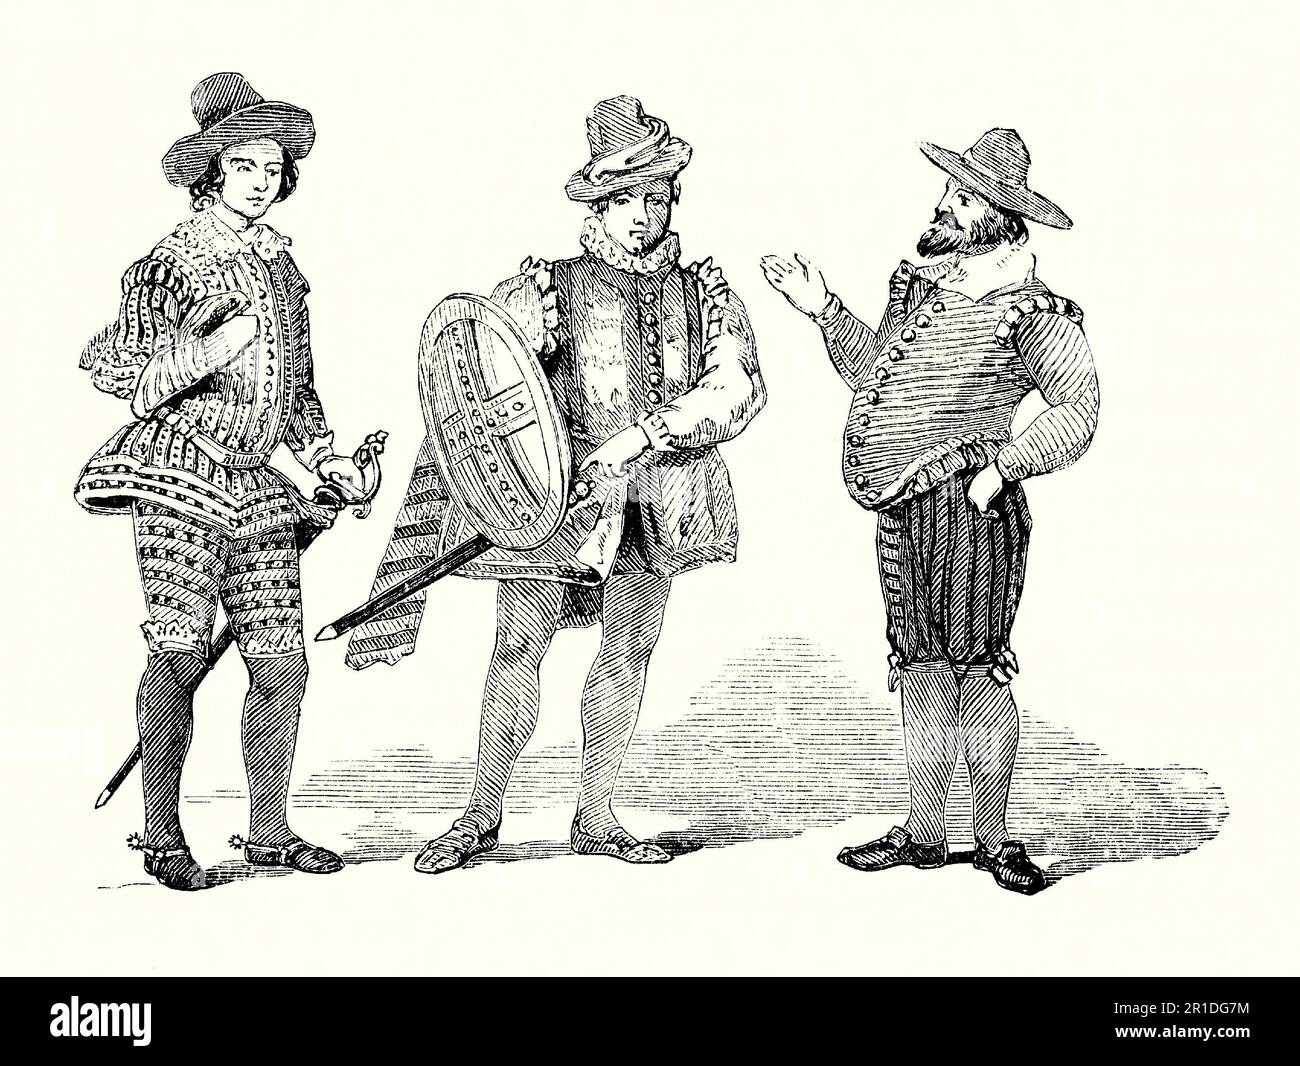 An old engraving of clothing worn by men in Tudor/Elizabethan times in England. The style of dress dates from latter part of the 16th and early 17th centuries during the reign of Elizabeth I (1558–1603). More variety crept into taste and fashions of the era. For men the doublet and hose were in vogue, with breeches of various lengths below a tapered and narrow waist or cod-piece. Short cloaks worn over the top. Ruffs again featured. Hats with brims and a loose, informal style became popular. Hair length varied and beards and moustaches were fashionable. Stock Photo